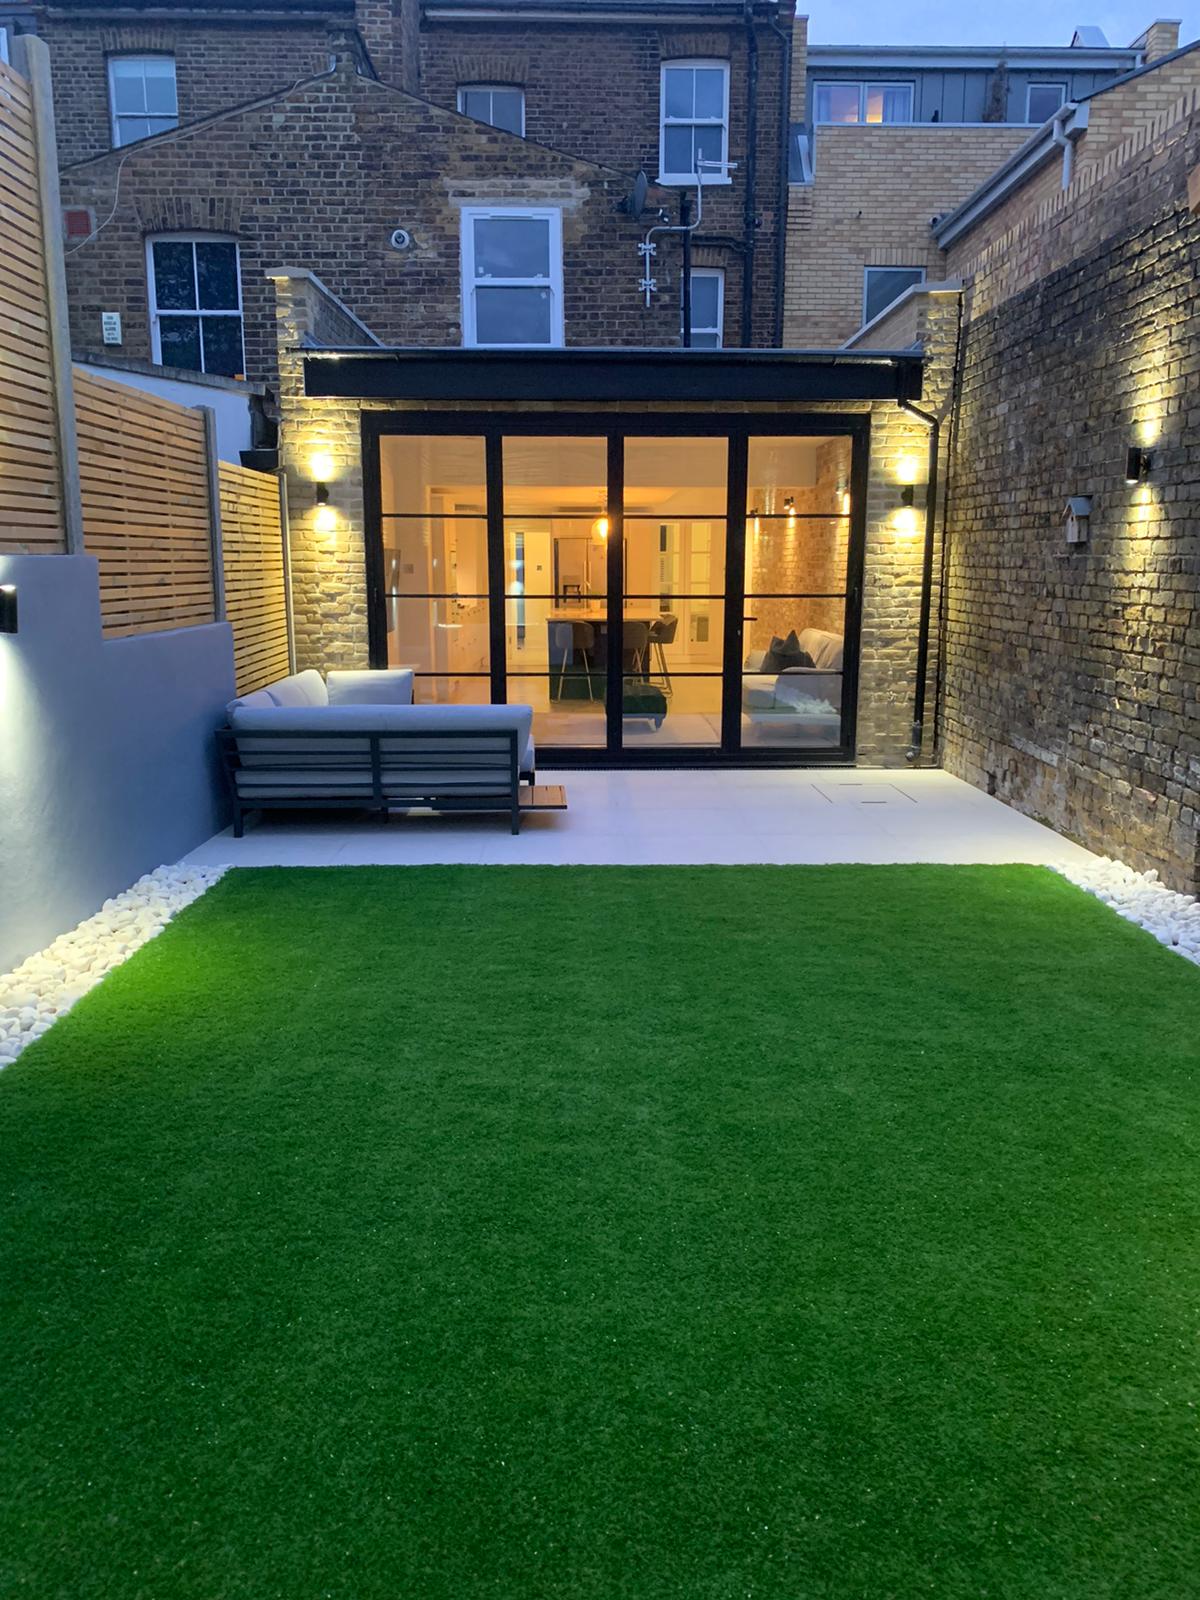 picture of house extension at dusk with lights on